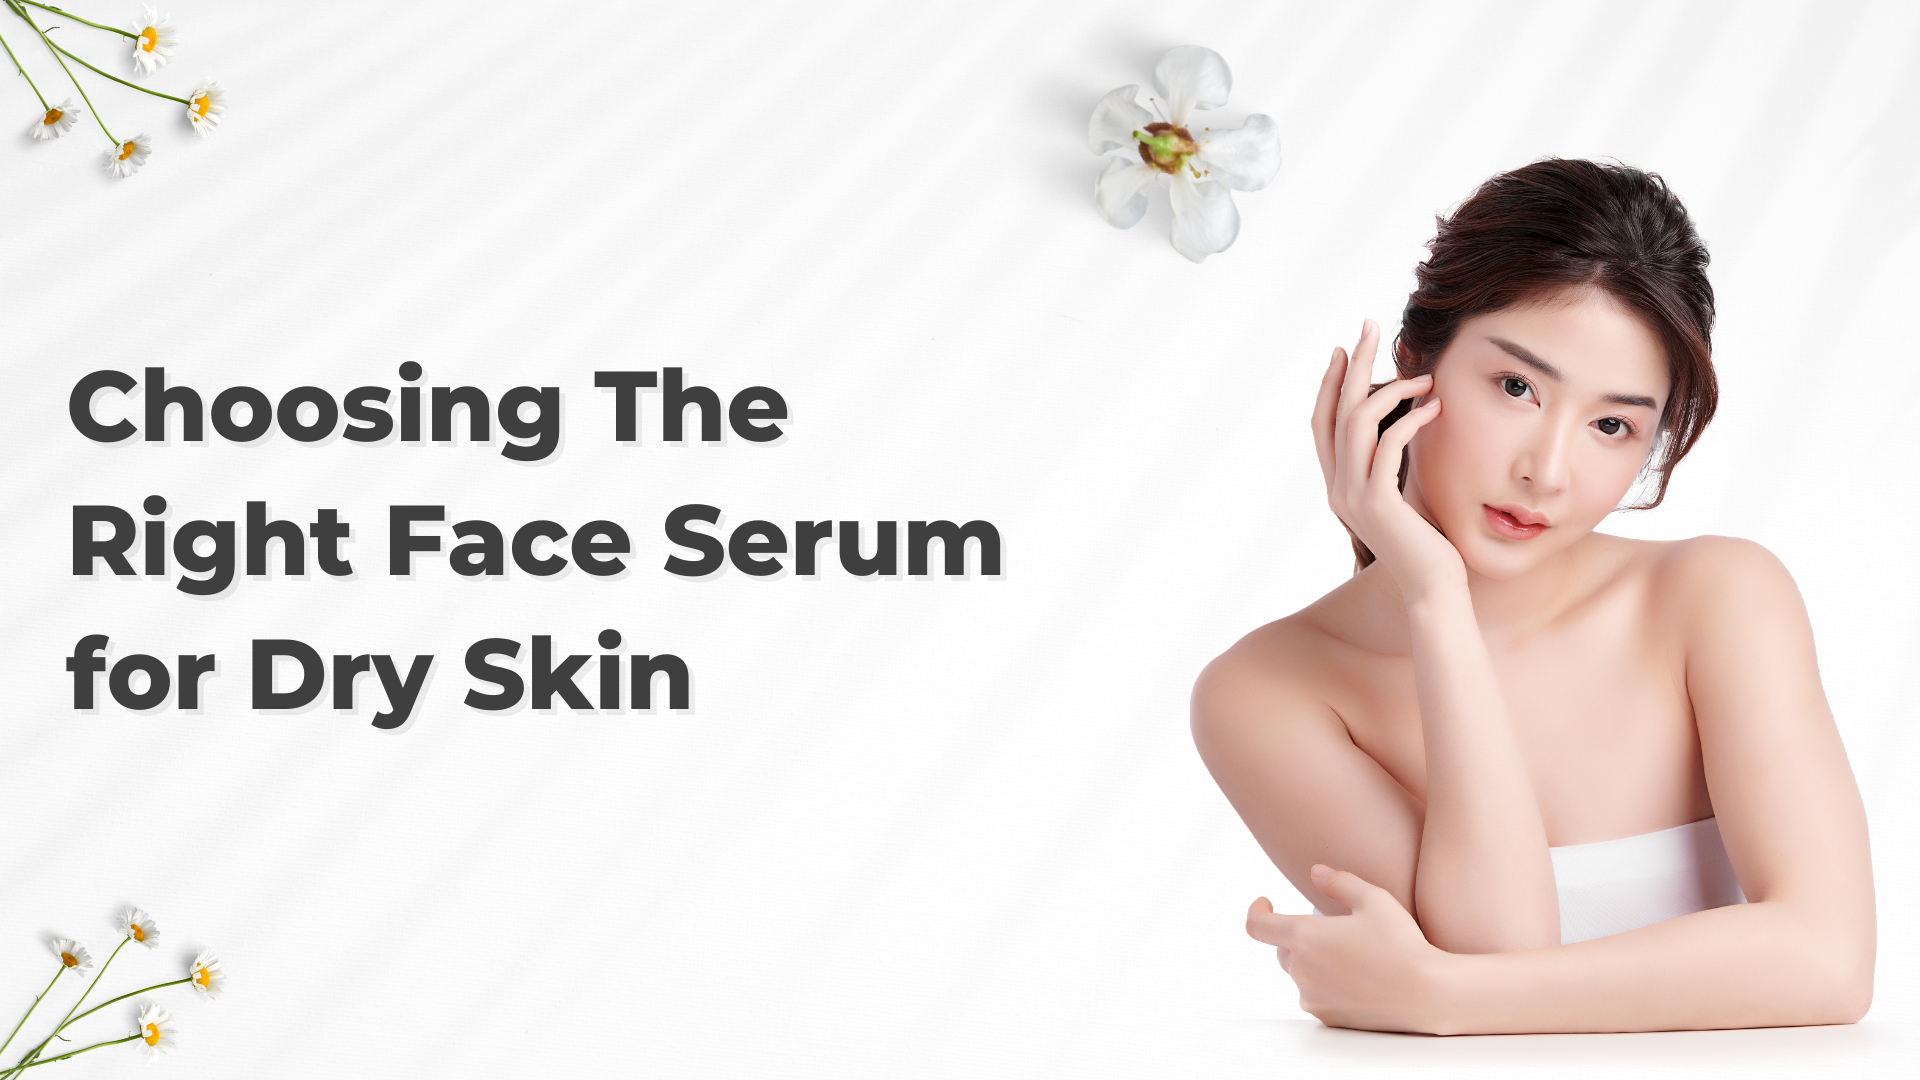 Choosing The Right Face Serum for Dry Skin